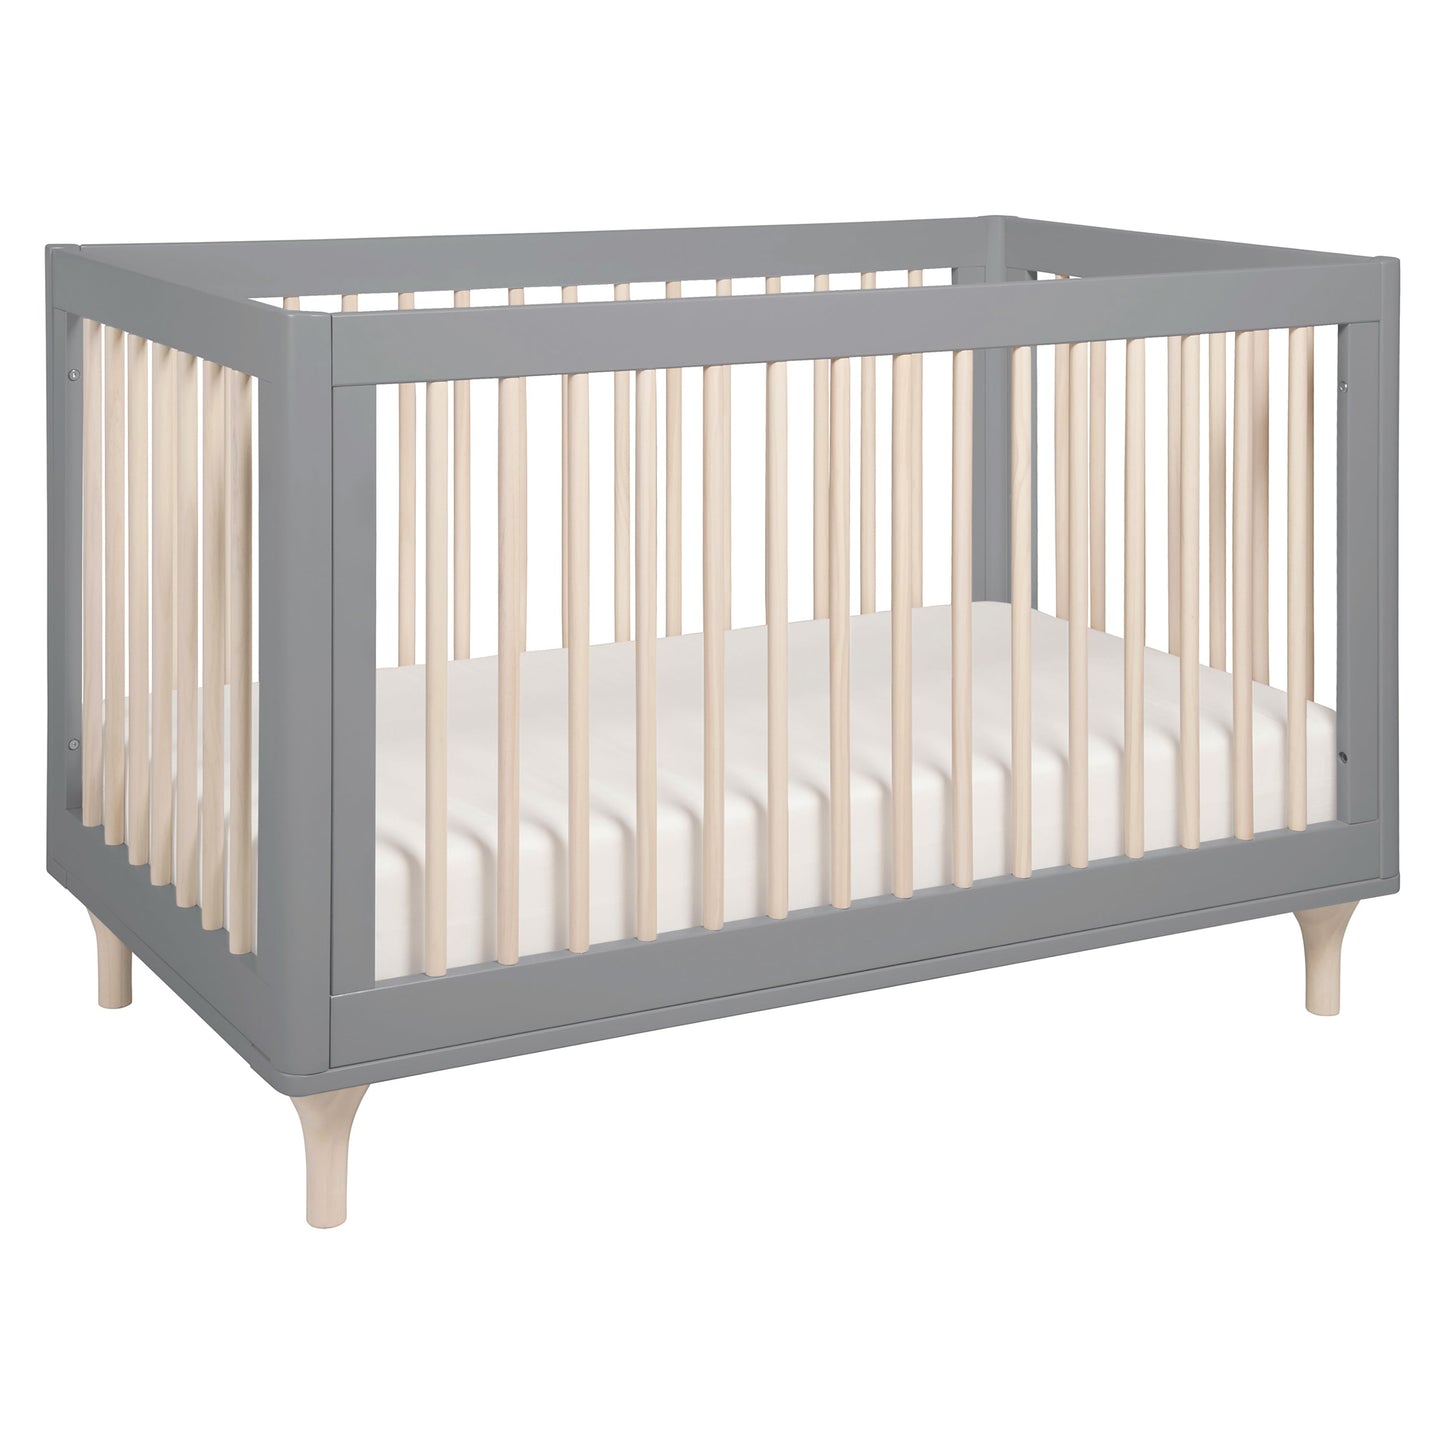 Lolly 3-in-1 Convertible Crib with Conversion Kit